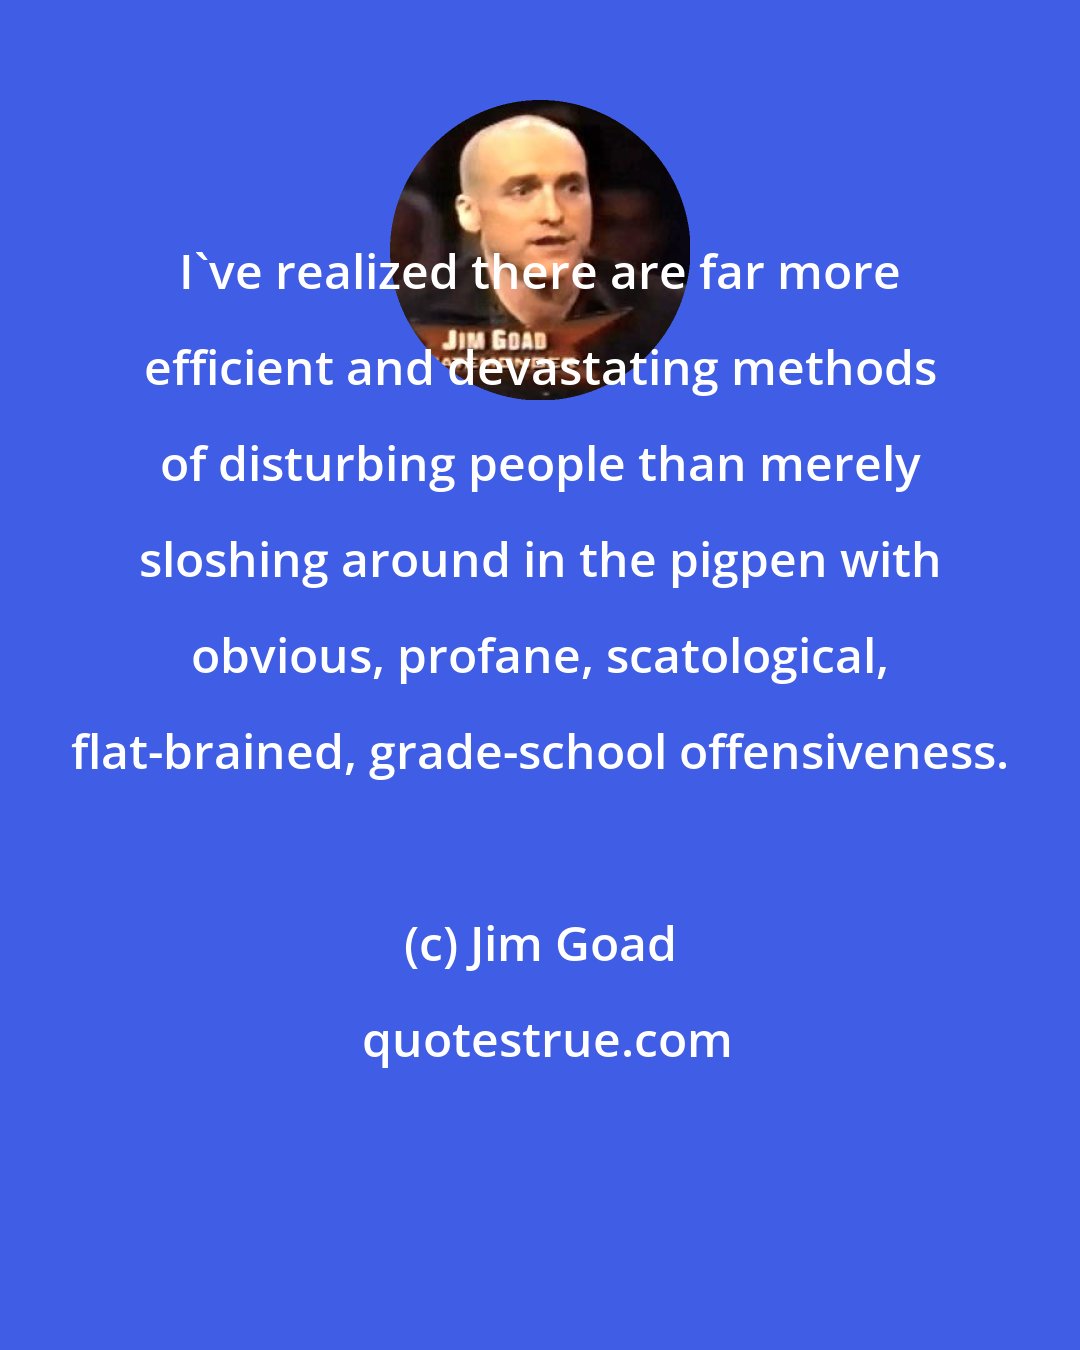 Jim Goad: I've realized there are far more efficient and devastating methods of disturbing people than merely sloshing around in the pigpen with obvious, profane, scatological, flat-brained, grade-school offensiveness.